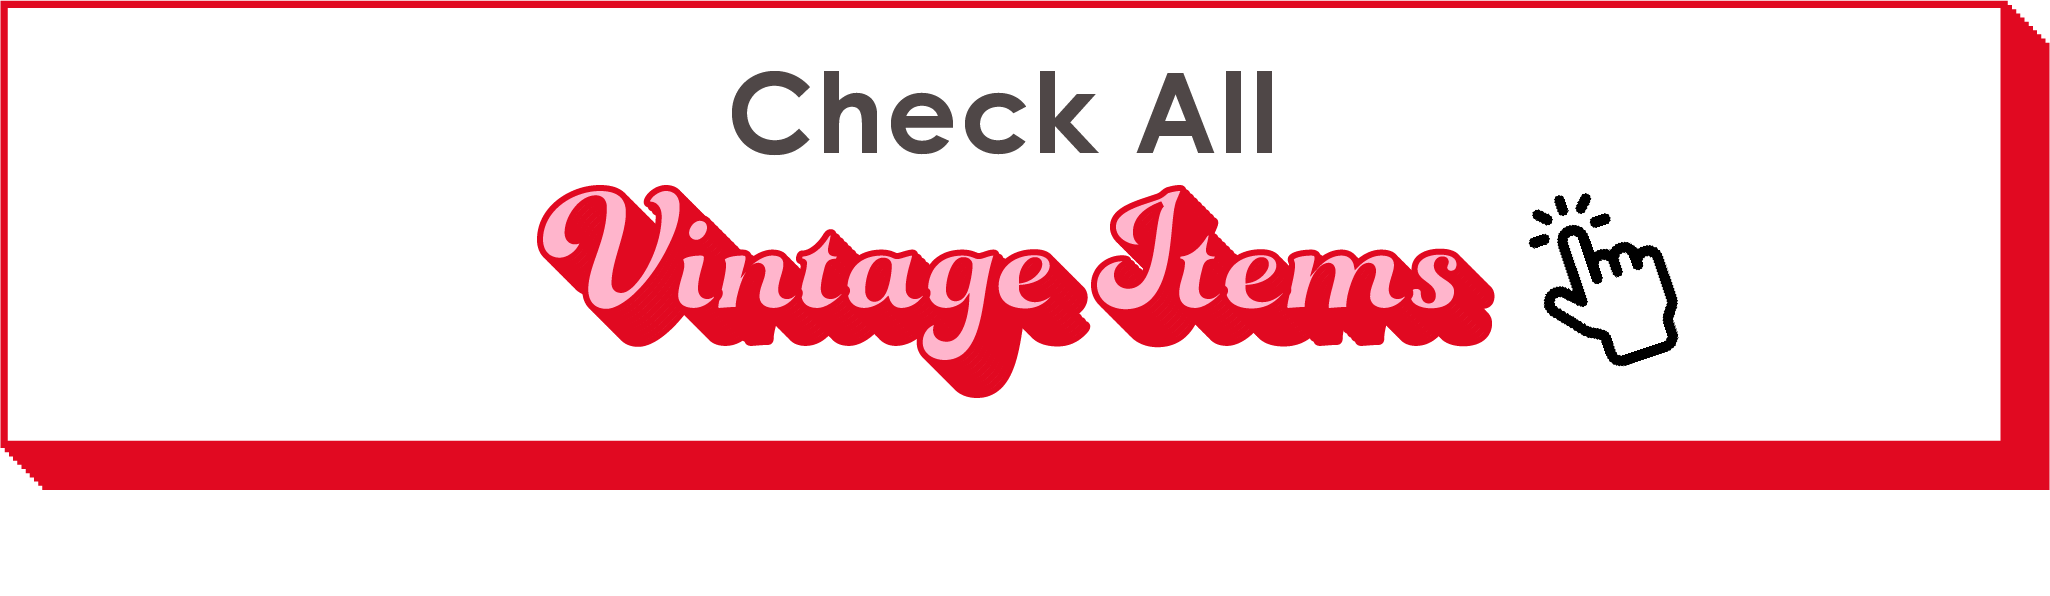 Check all Vintage items